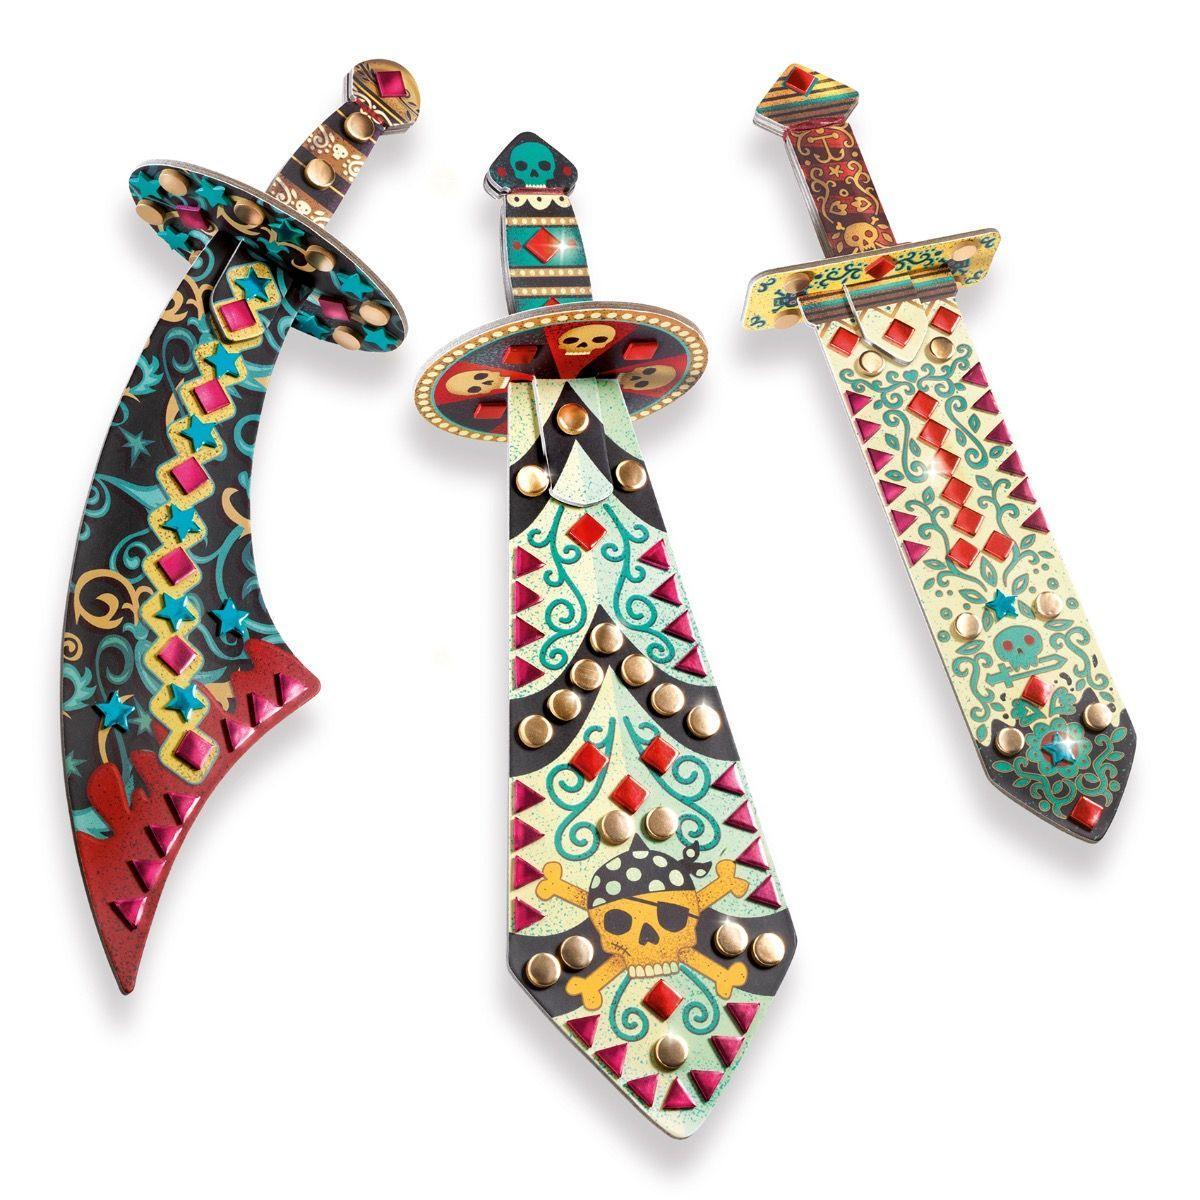 Djeco Do It Yourself - 3 Mosaic Swords to Decorate Like a Pirate - Why and Whale